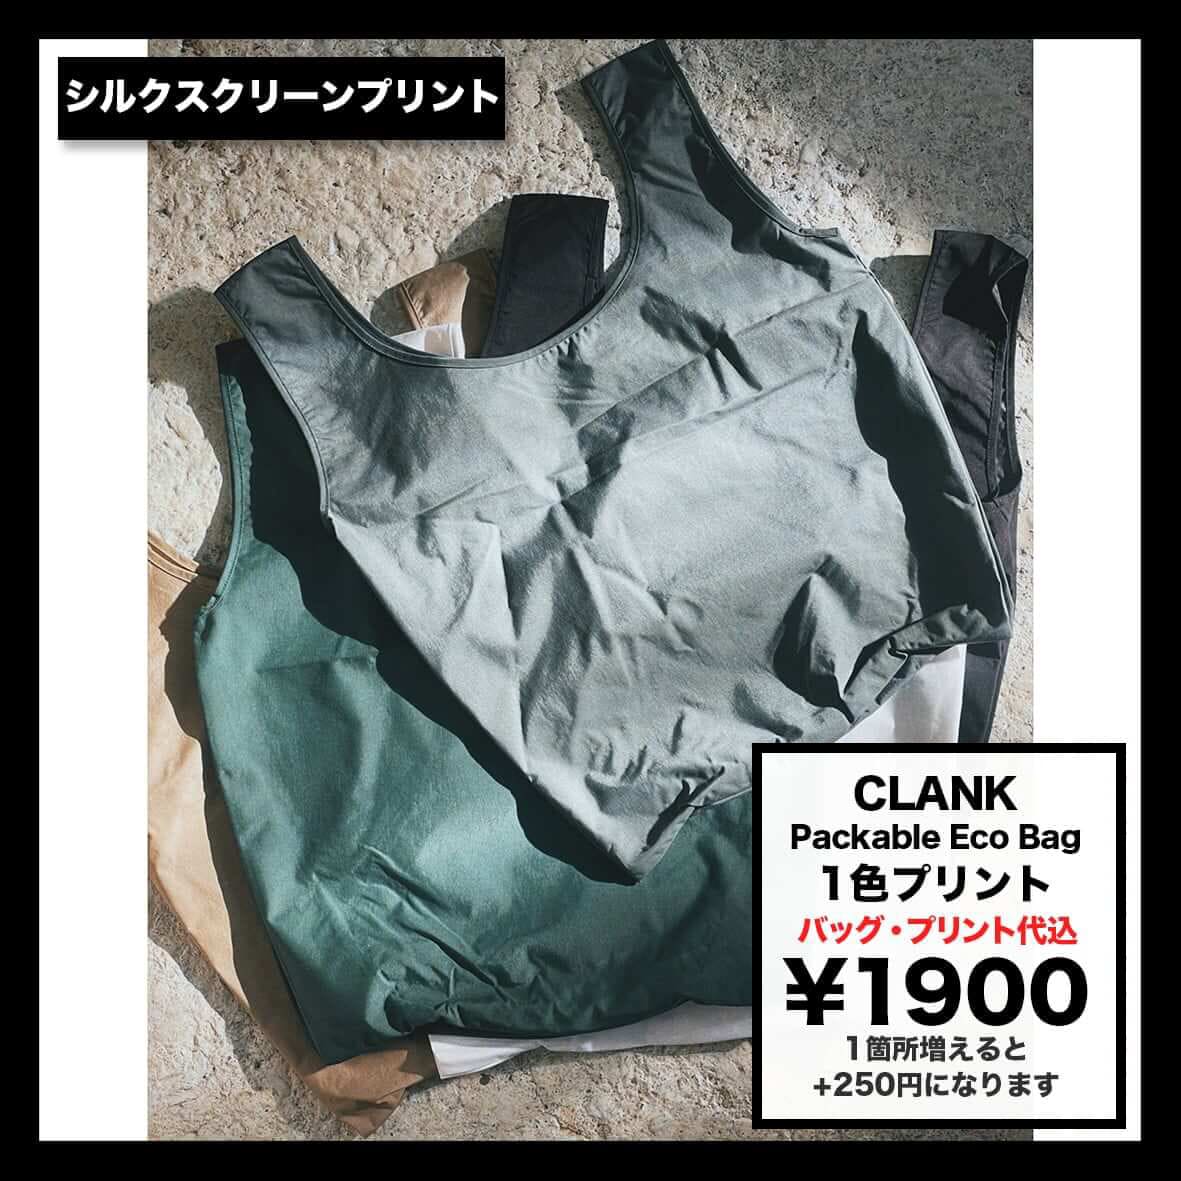 CLANK クランク Packable Eco Bag (品番CL01)